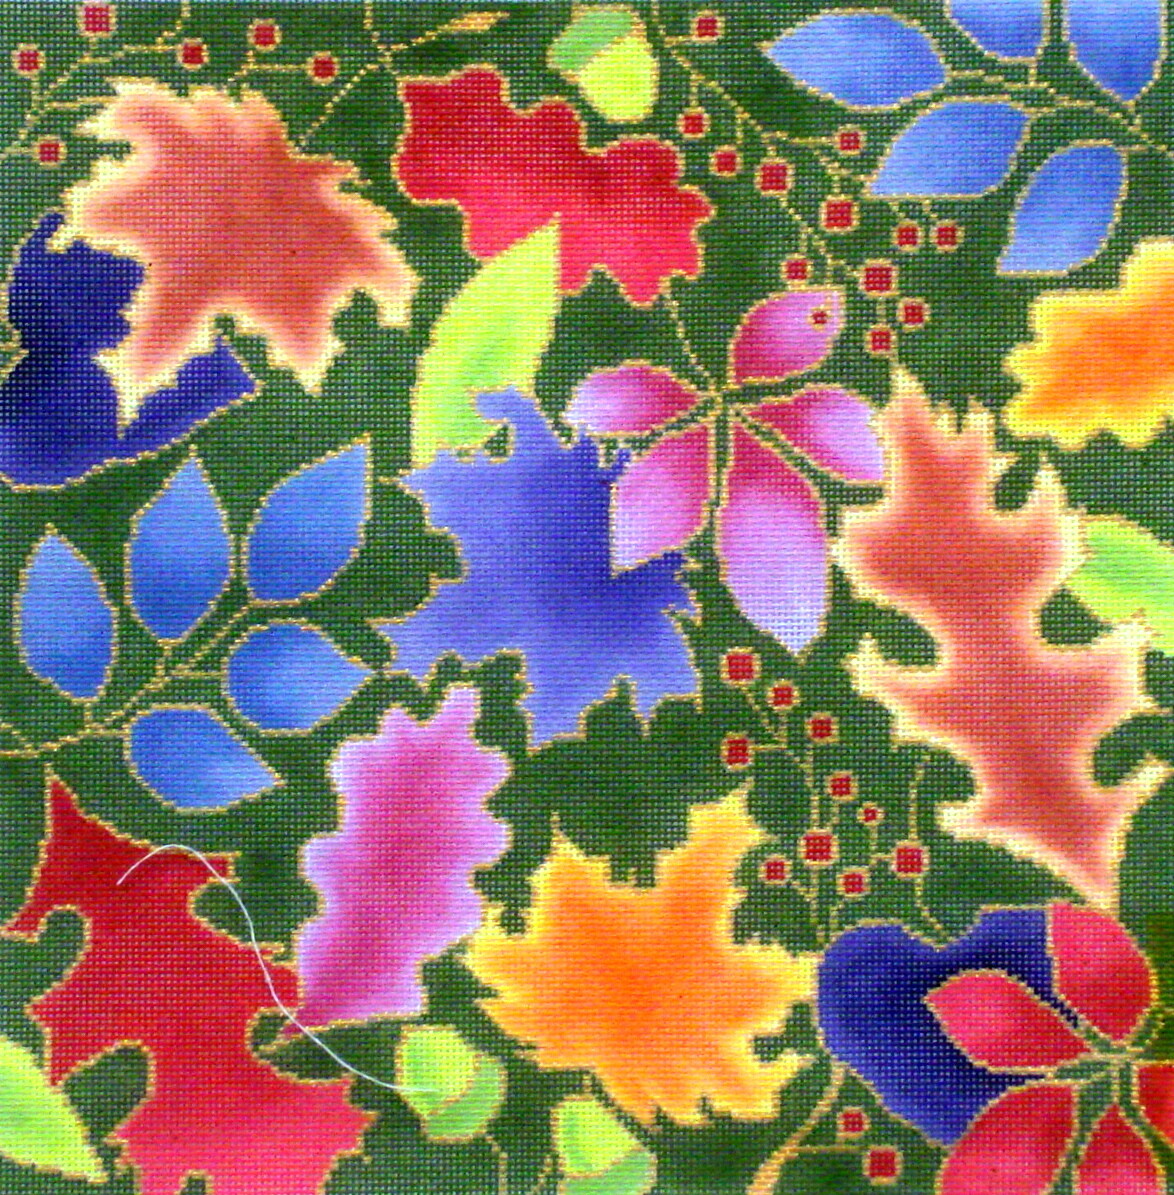 Autumn Leaves, handpainted by Brenda Stofft*Product may take longer than usual to arrive*